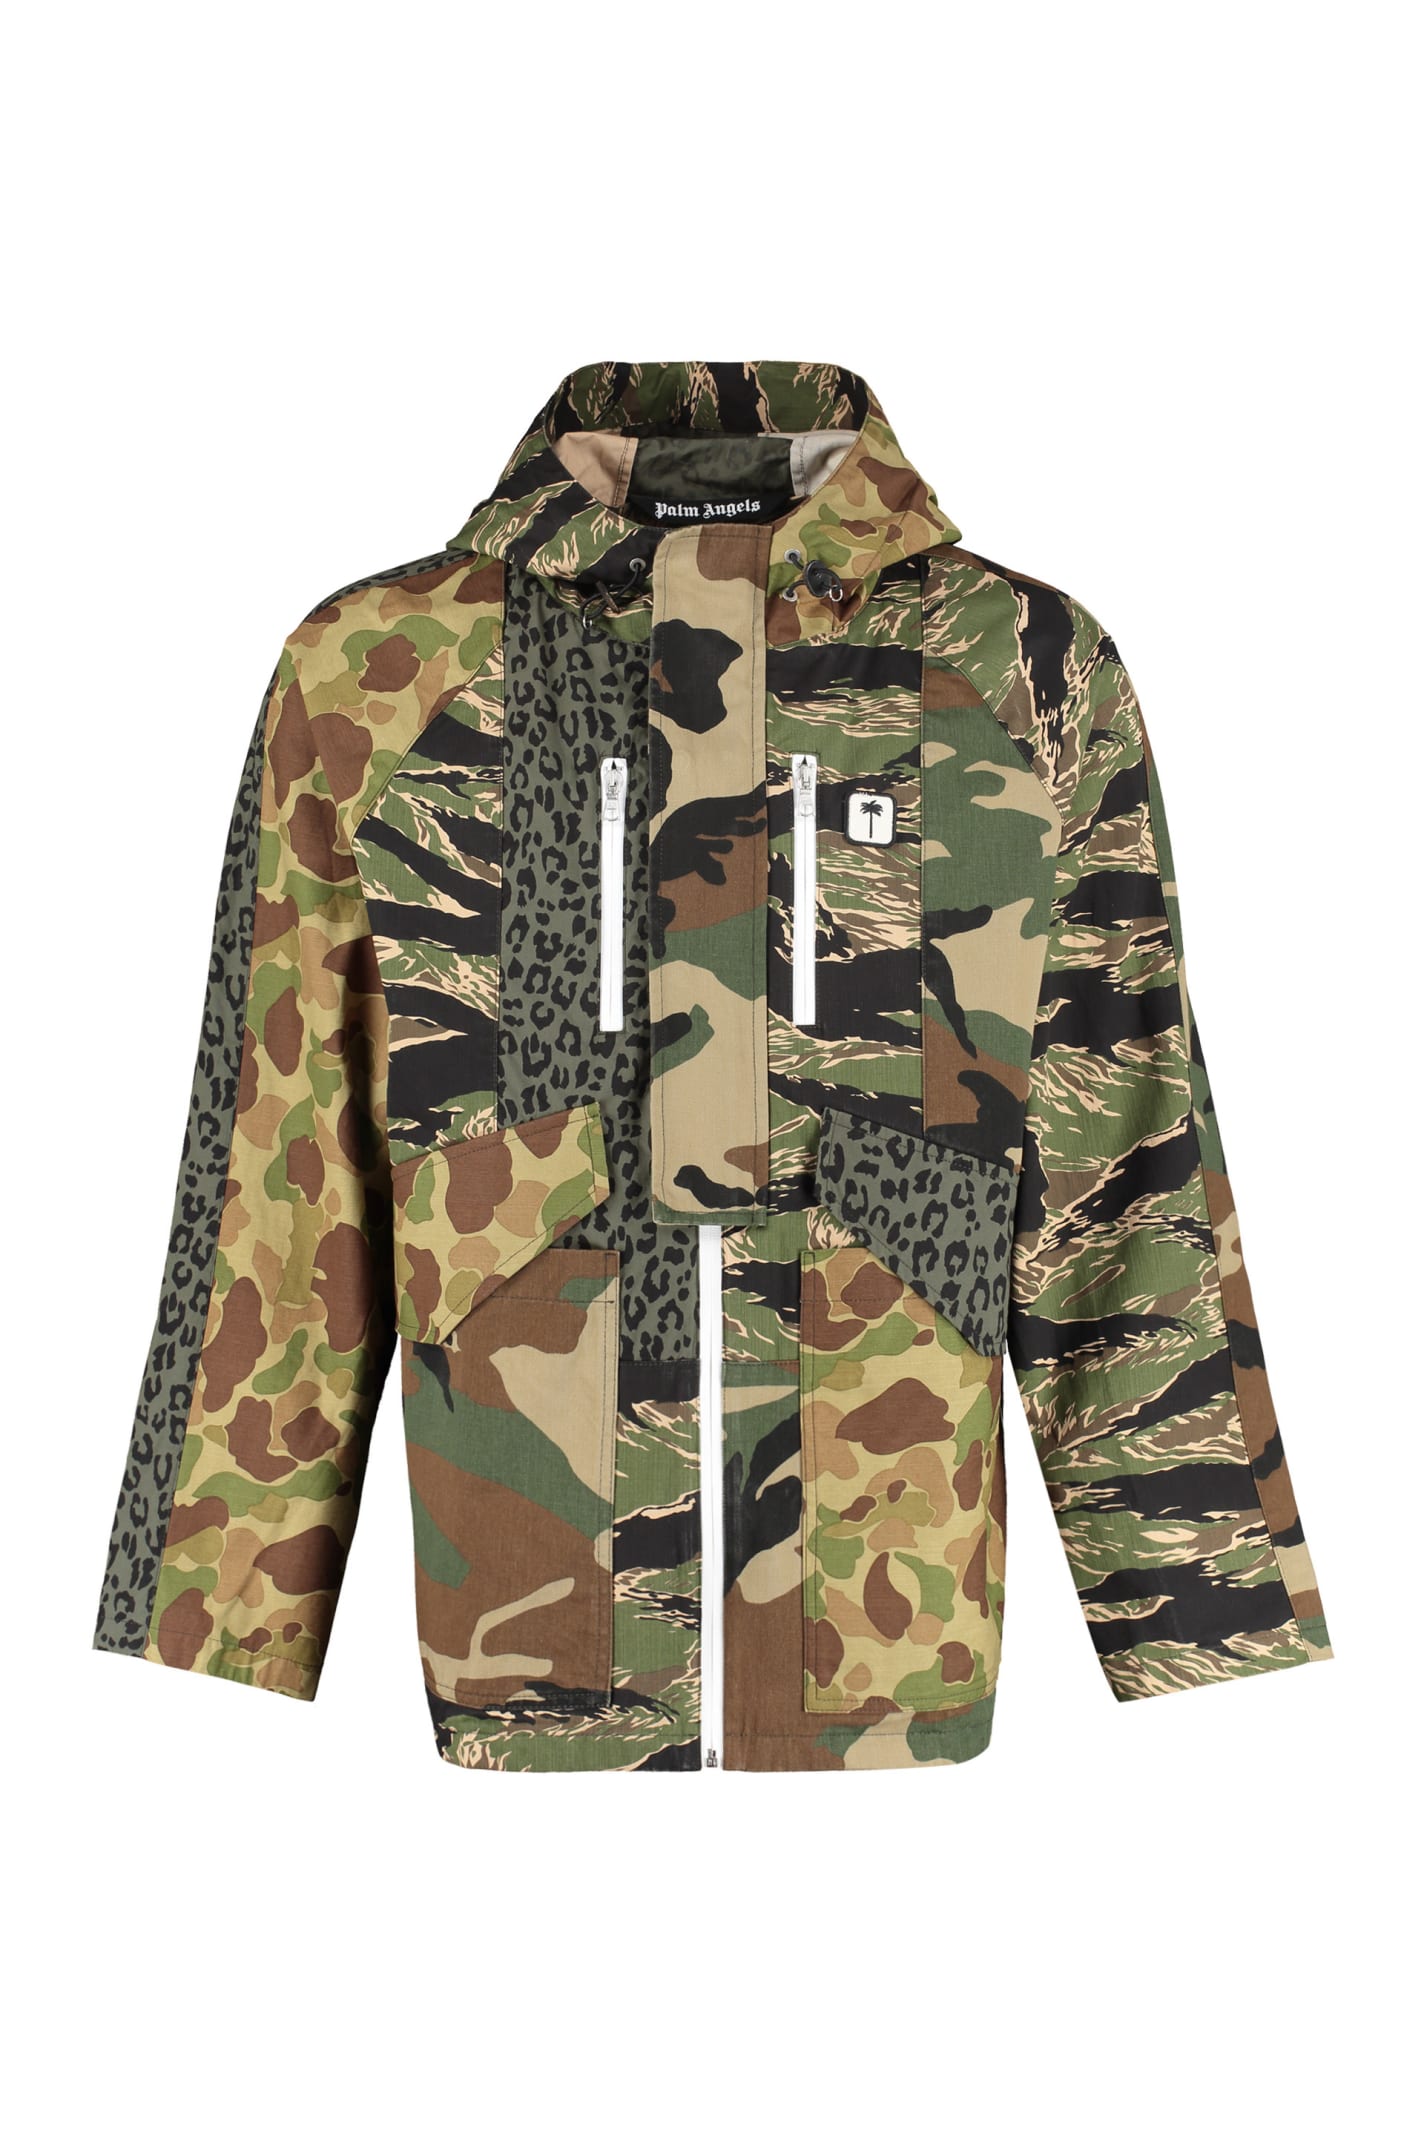 Palm Angels Hooded Cotton Parka